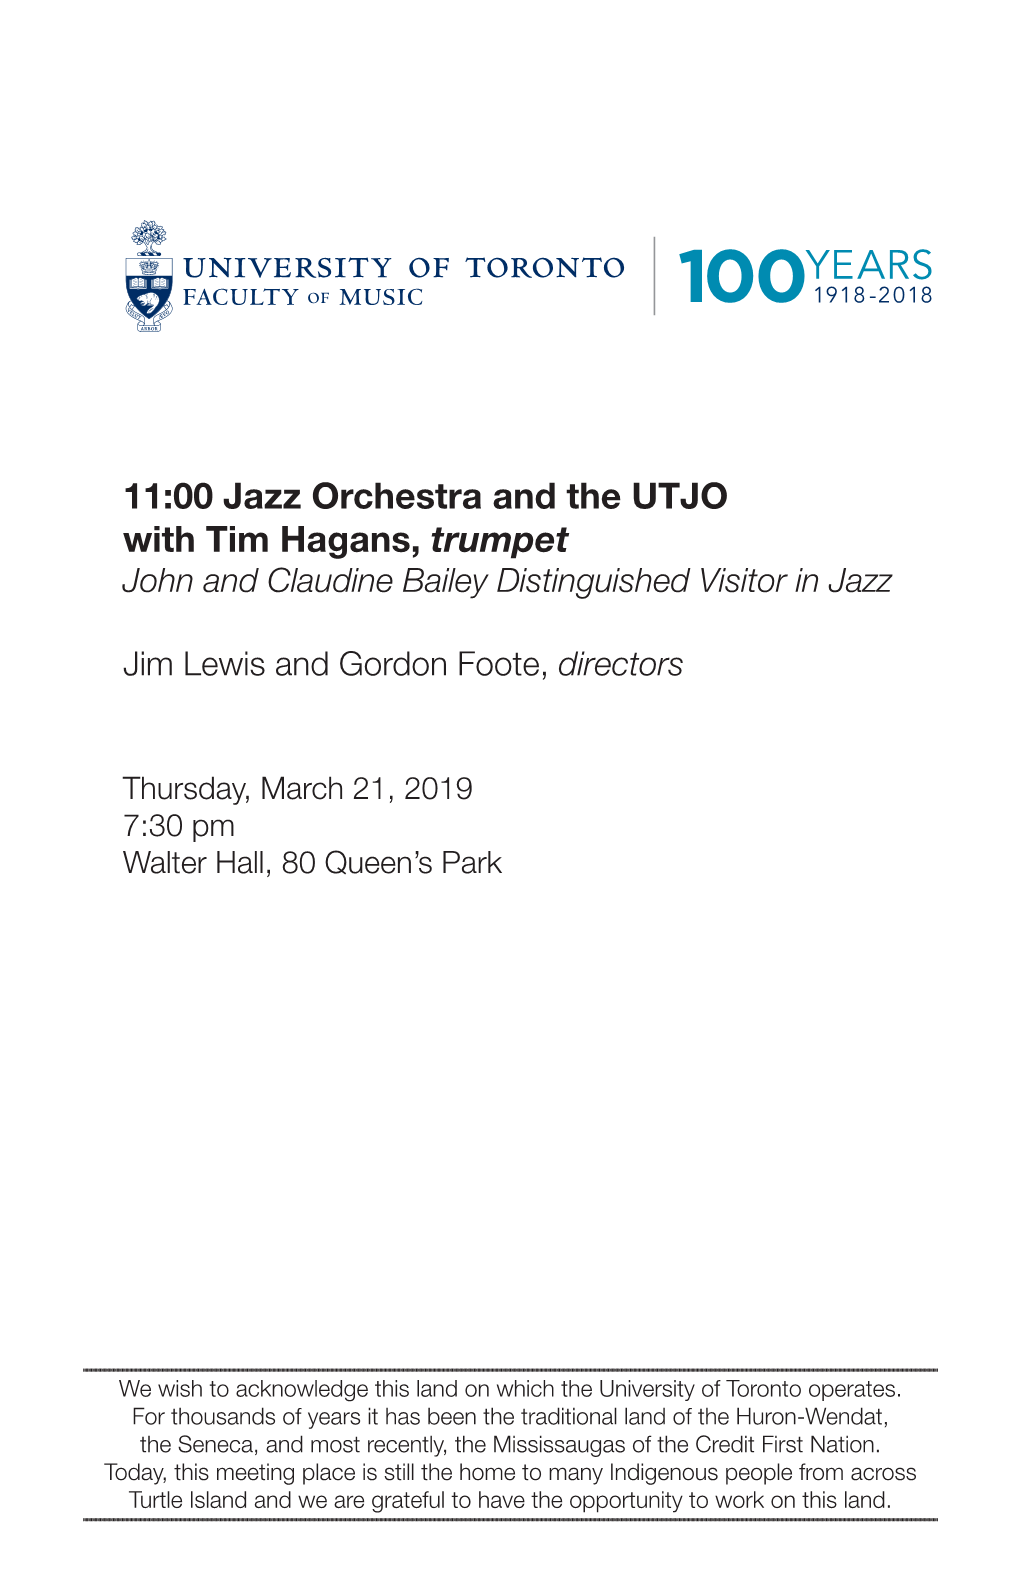 11:00 Jazz Orchestra and the UTJO with Tim Hagans, Trumpet John and Claudine Bailey Distinguished Visitor in Jazz